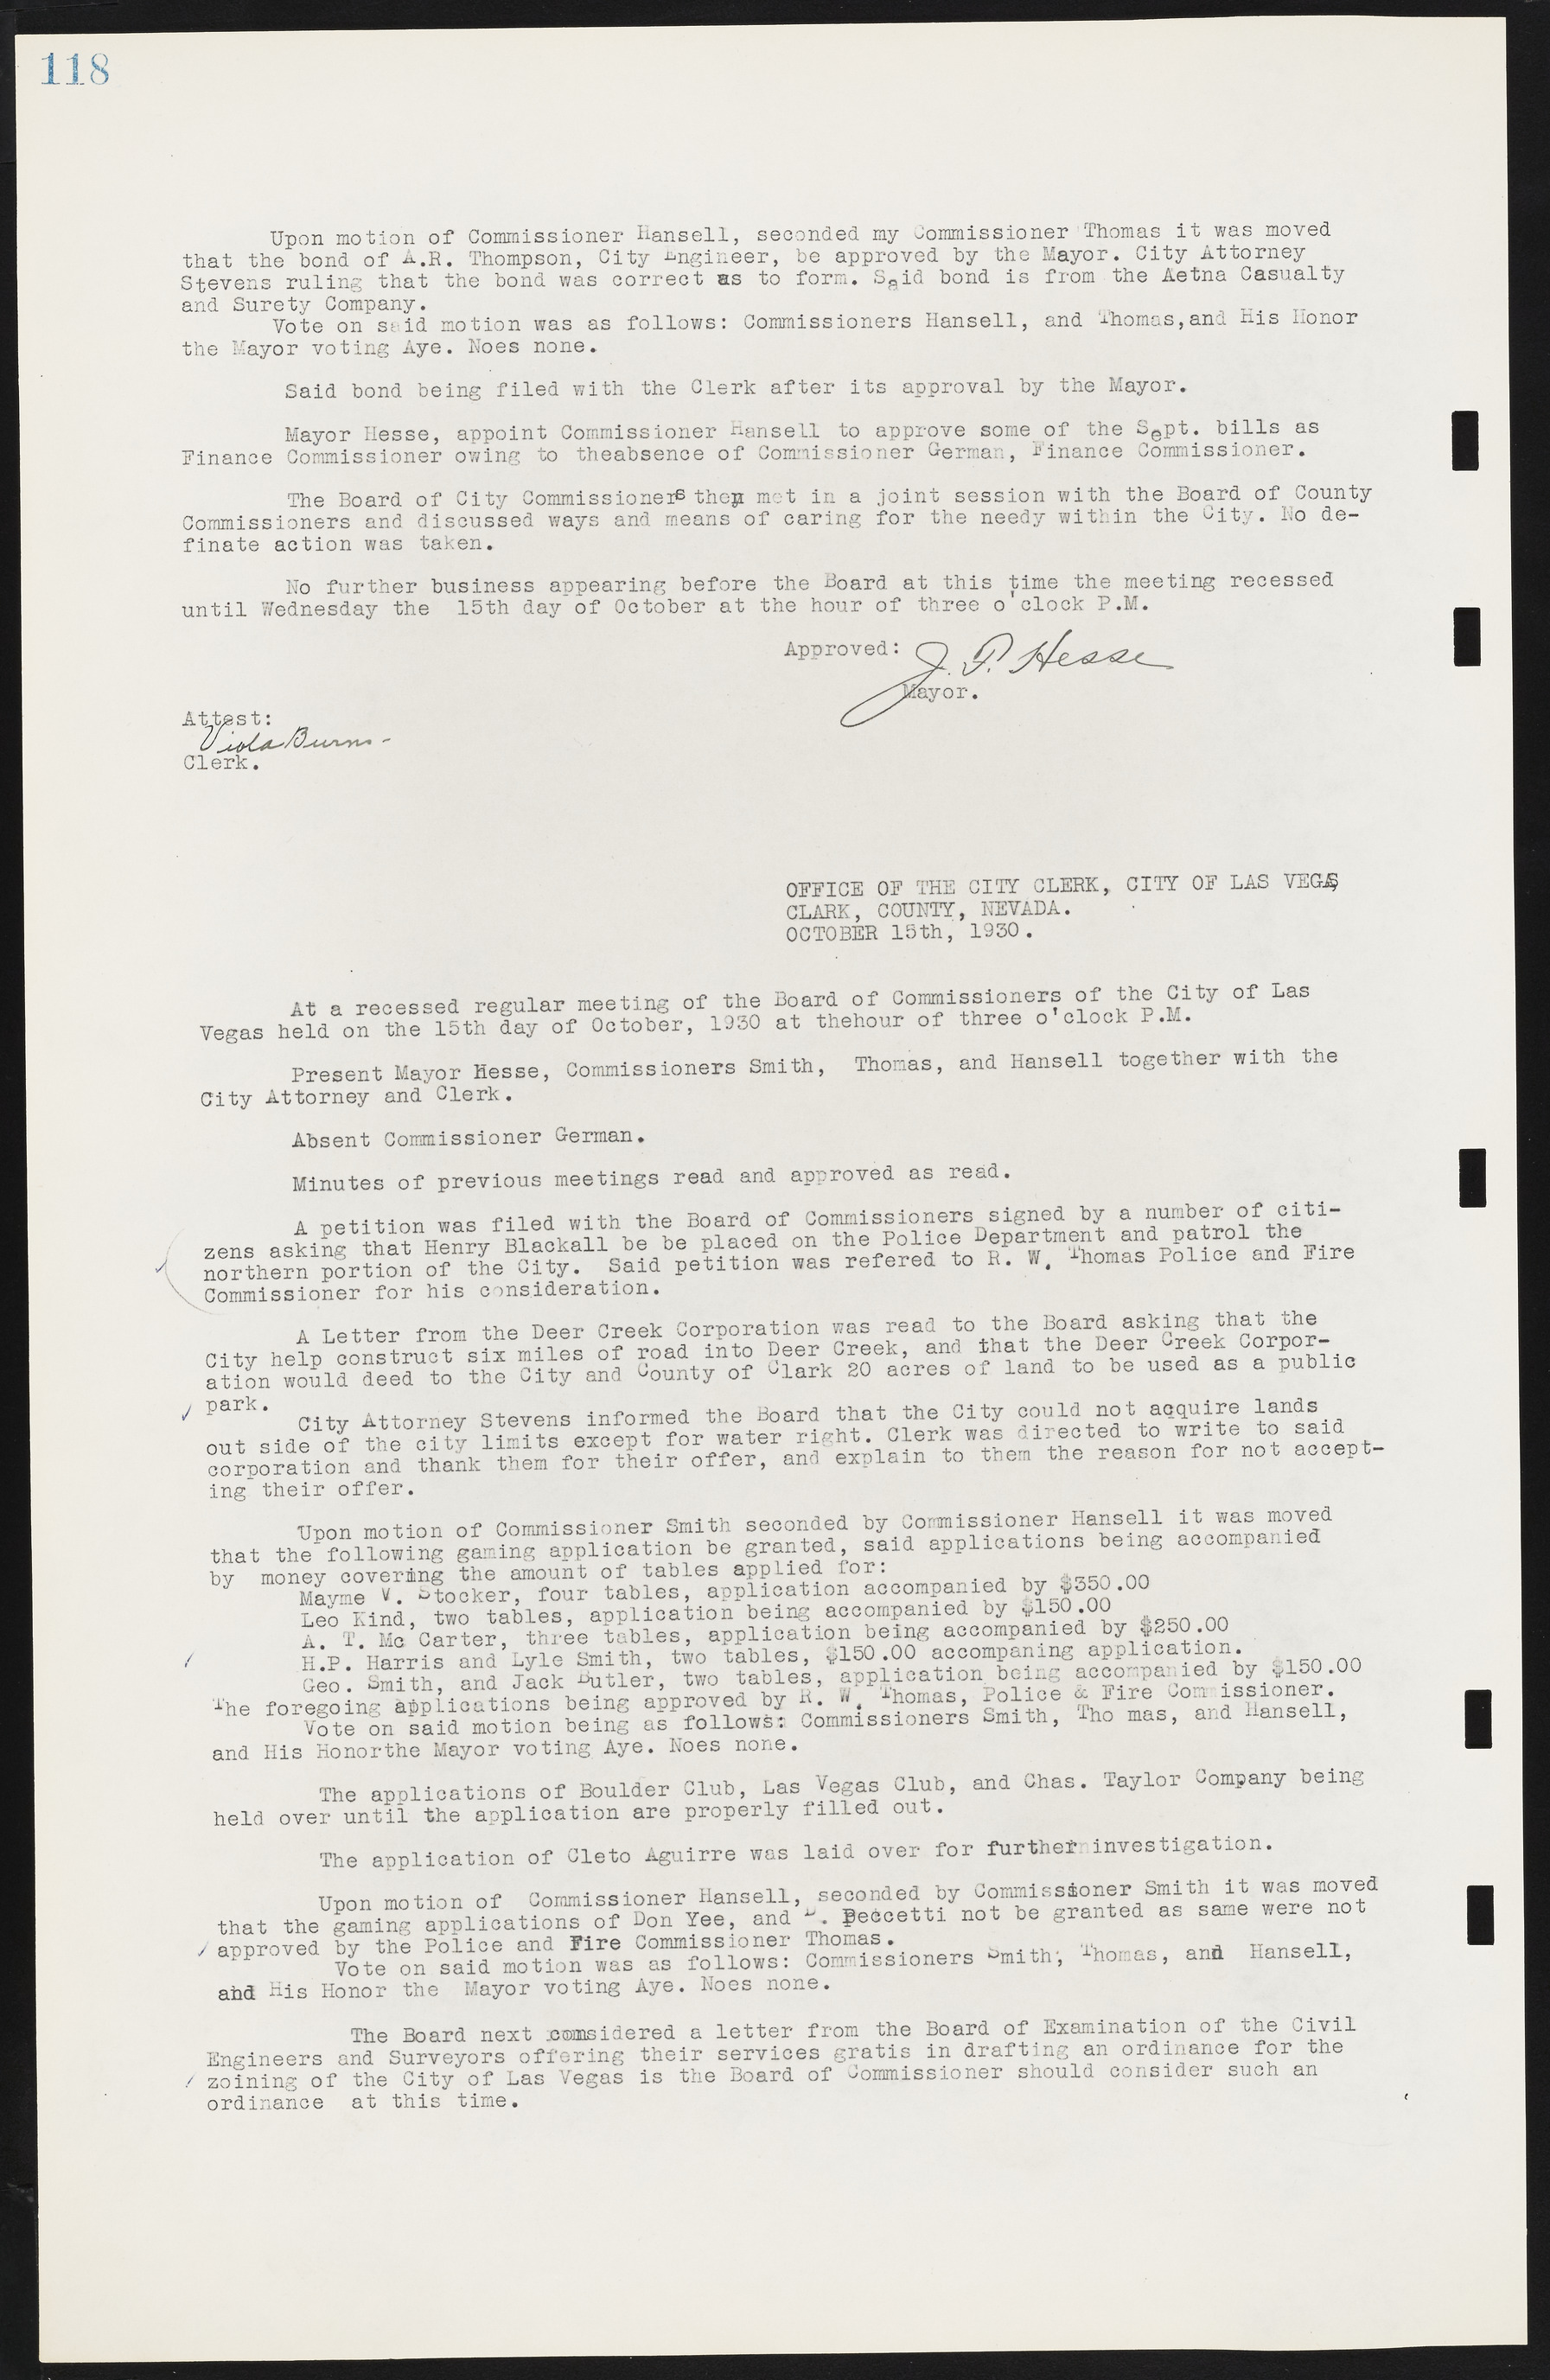 Las Vegas City Commission Minutes, May 14, 1929 to February 11, 1937, lvc000003-124